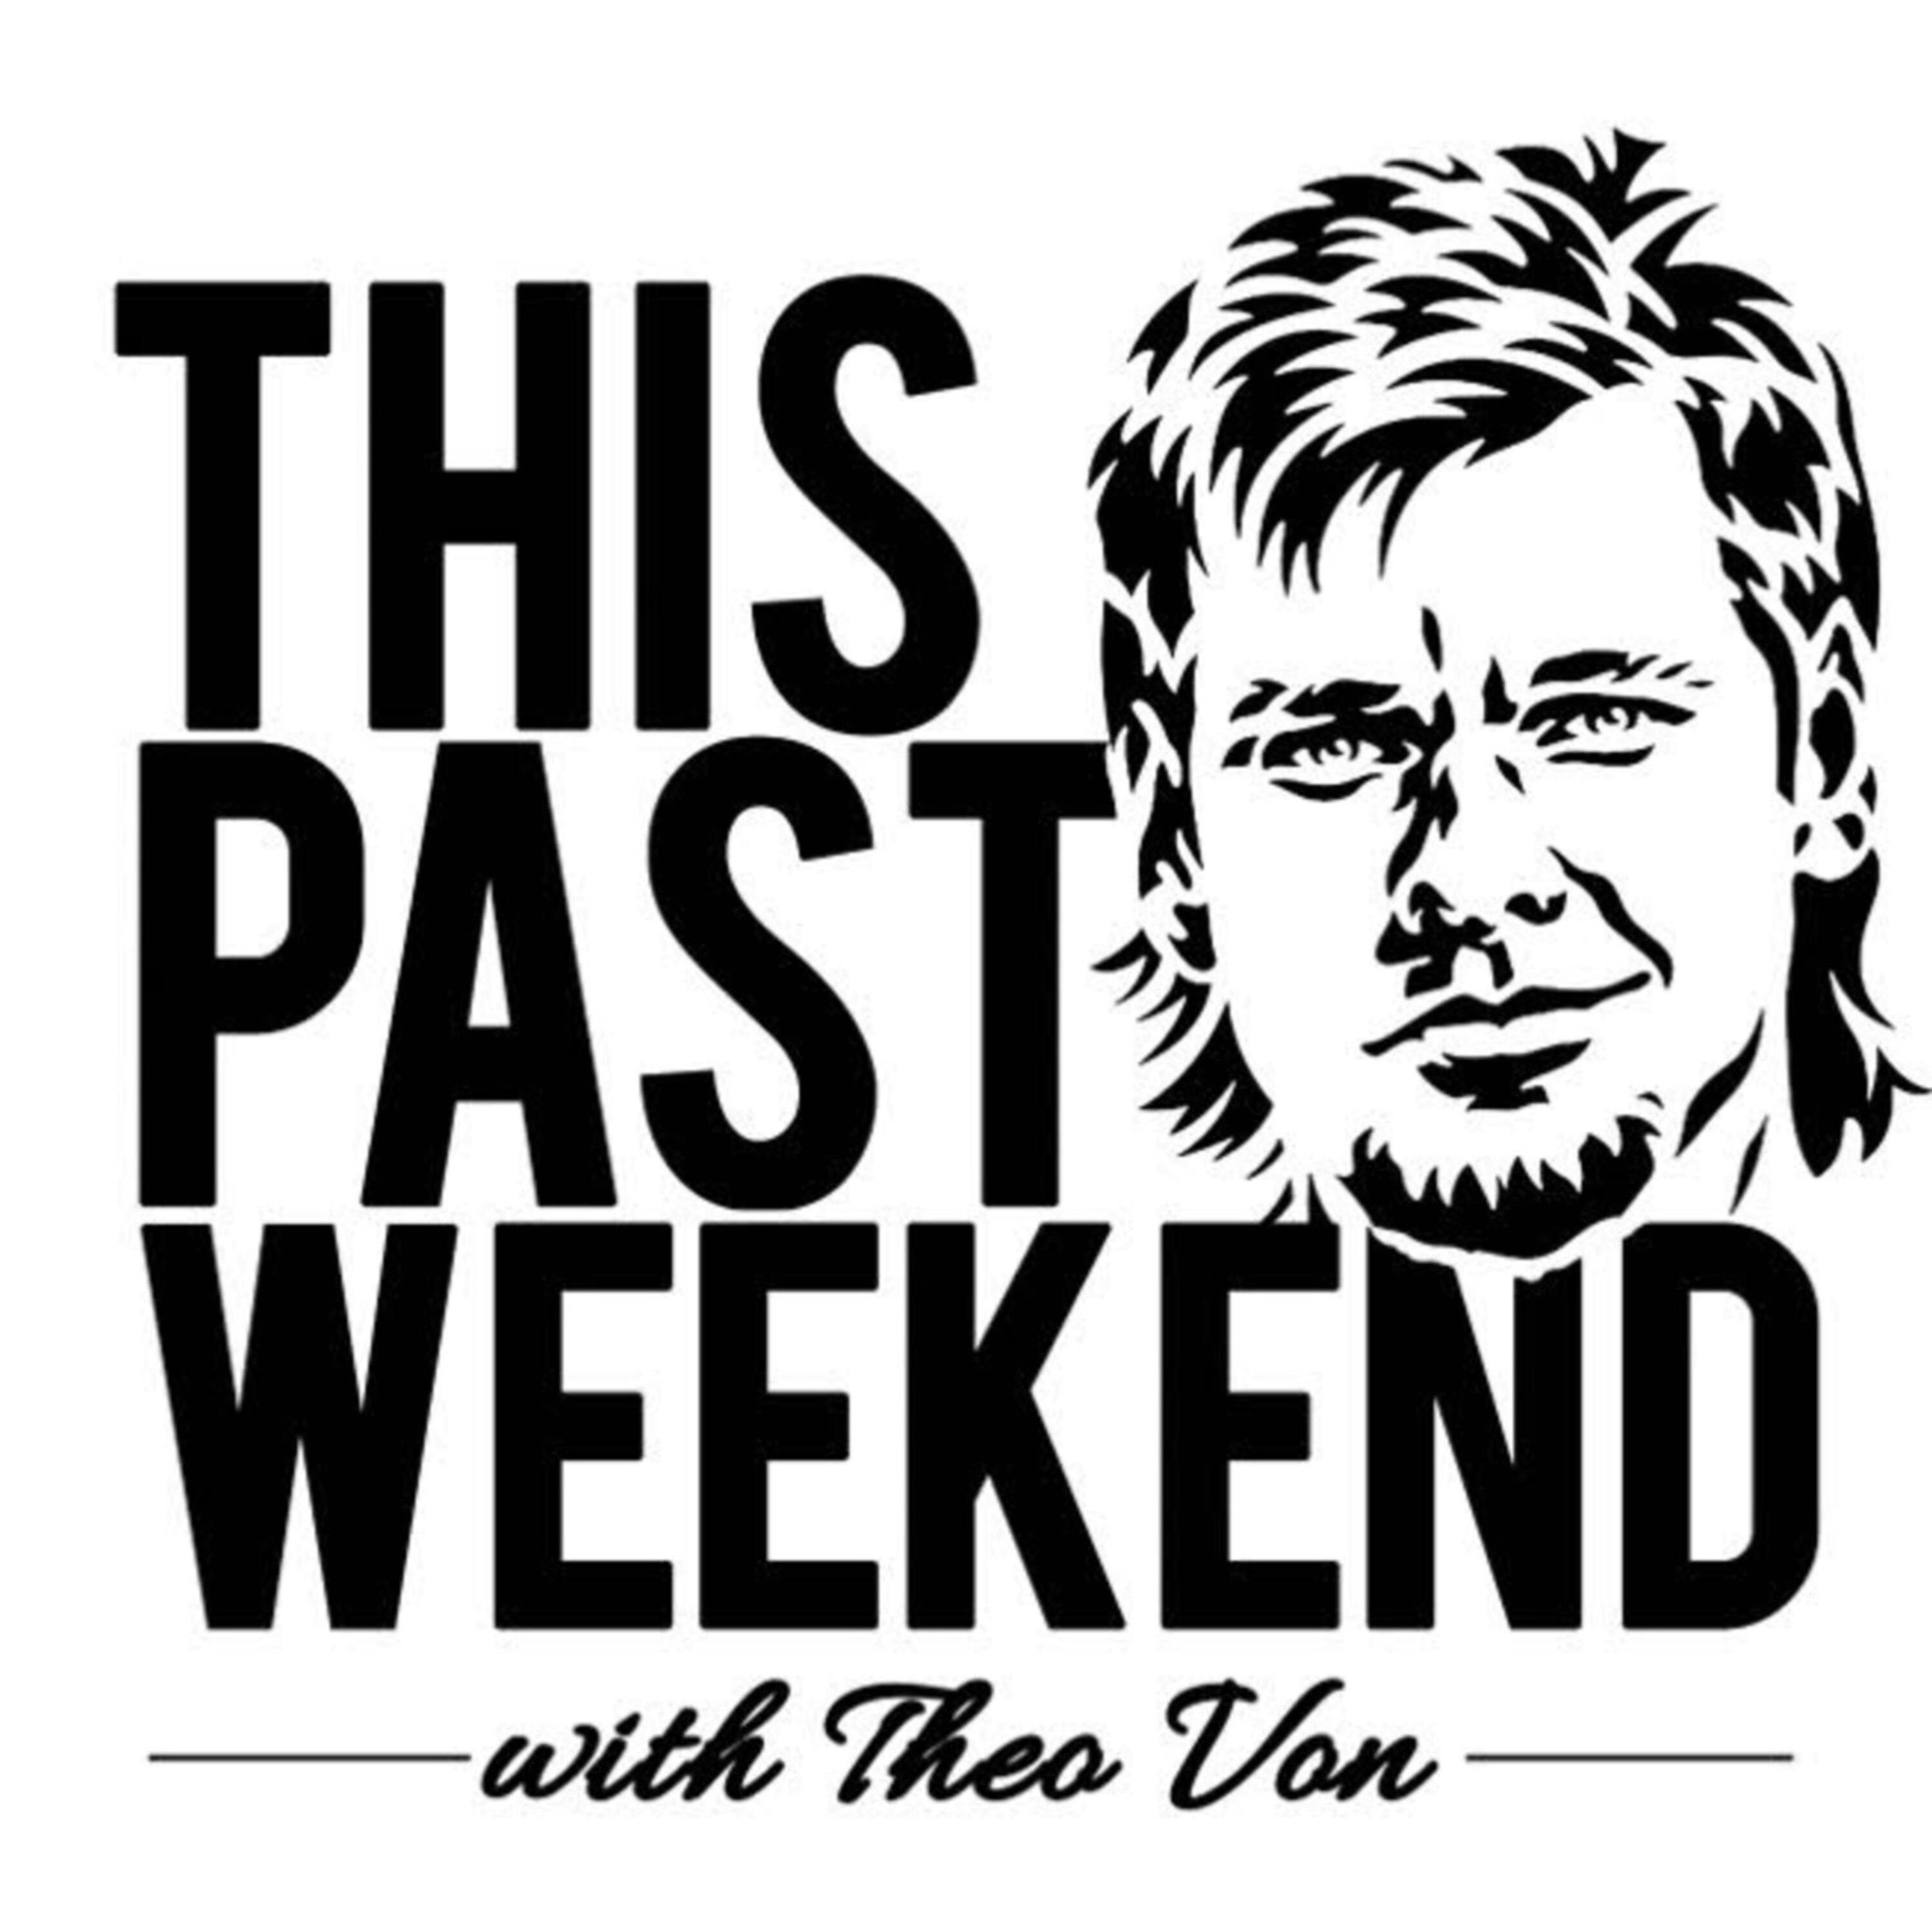 Mike Posner | This Past Weekend #241 by Theo Von